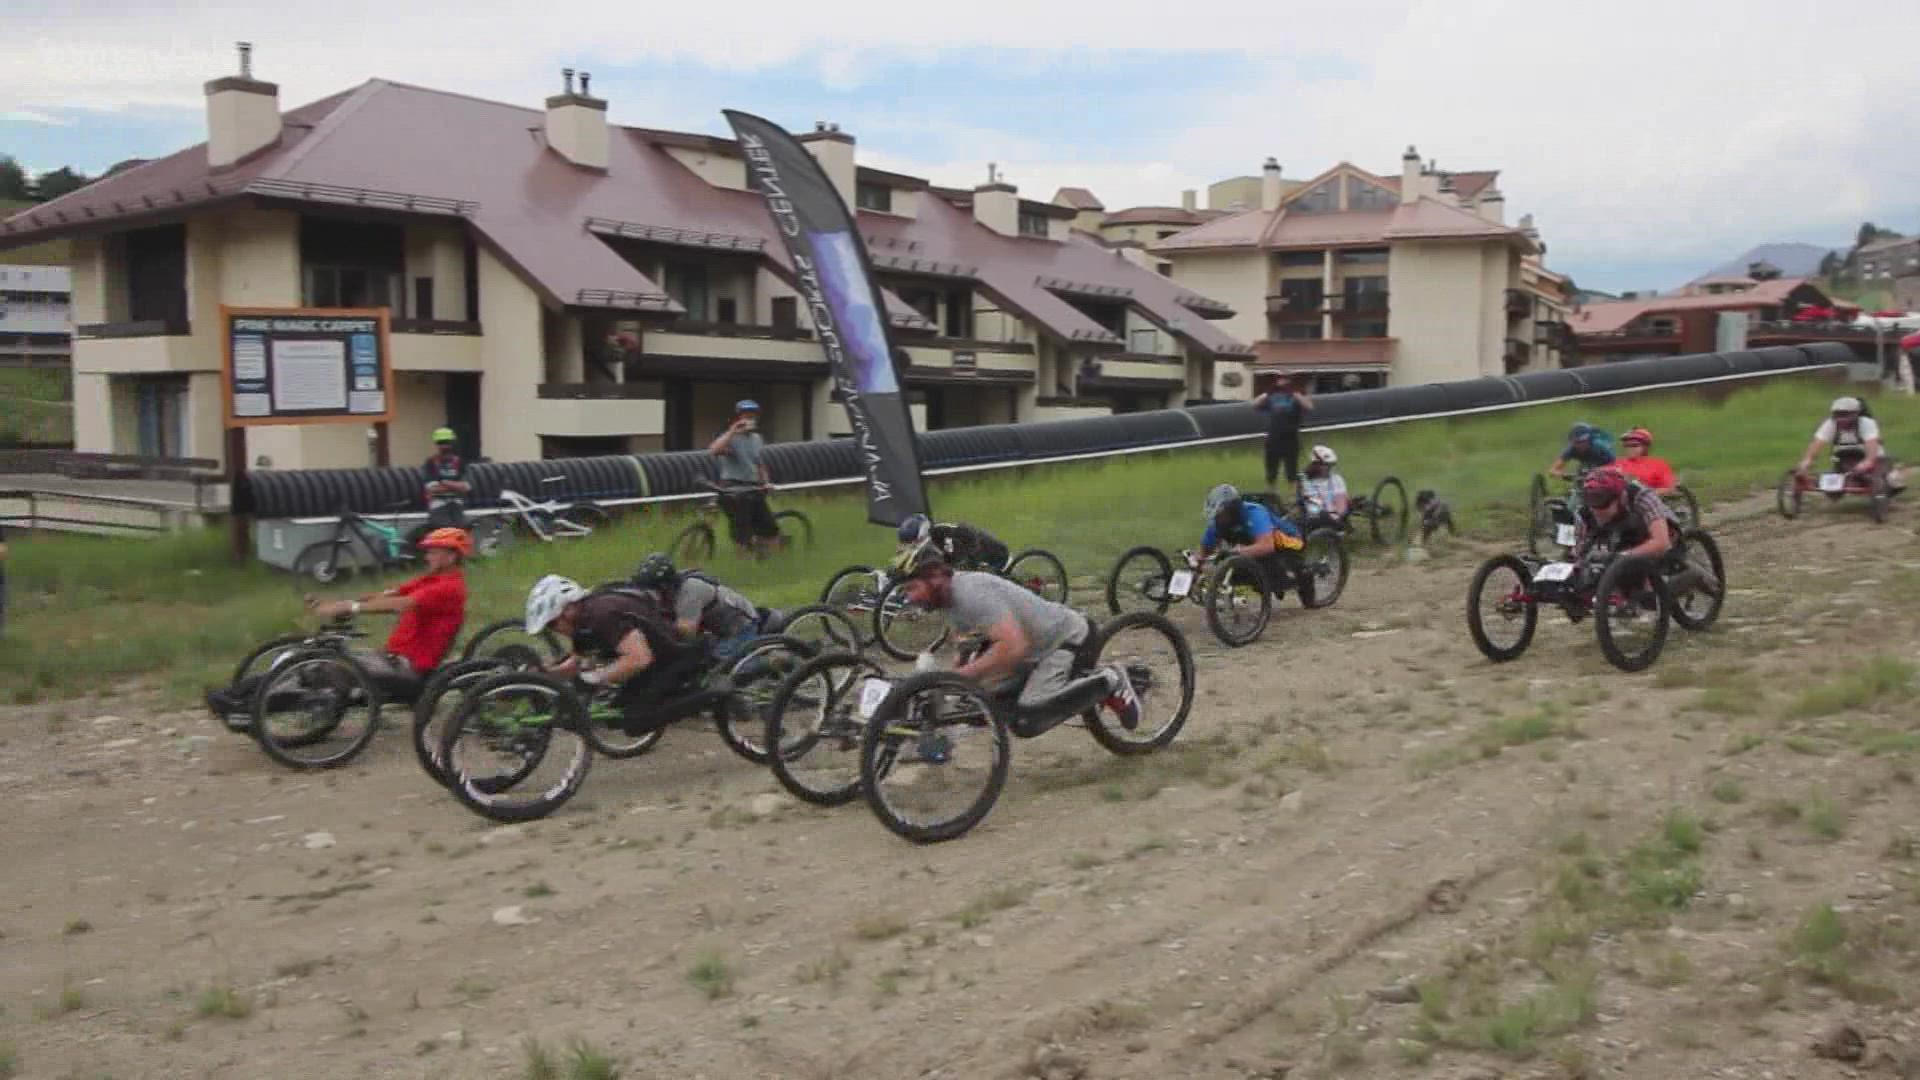 Competitors from across the country are gathering for three days of riding and racing.